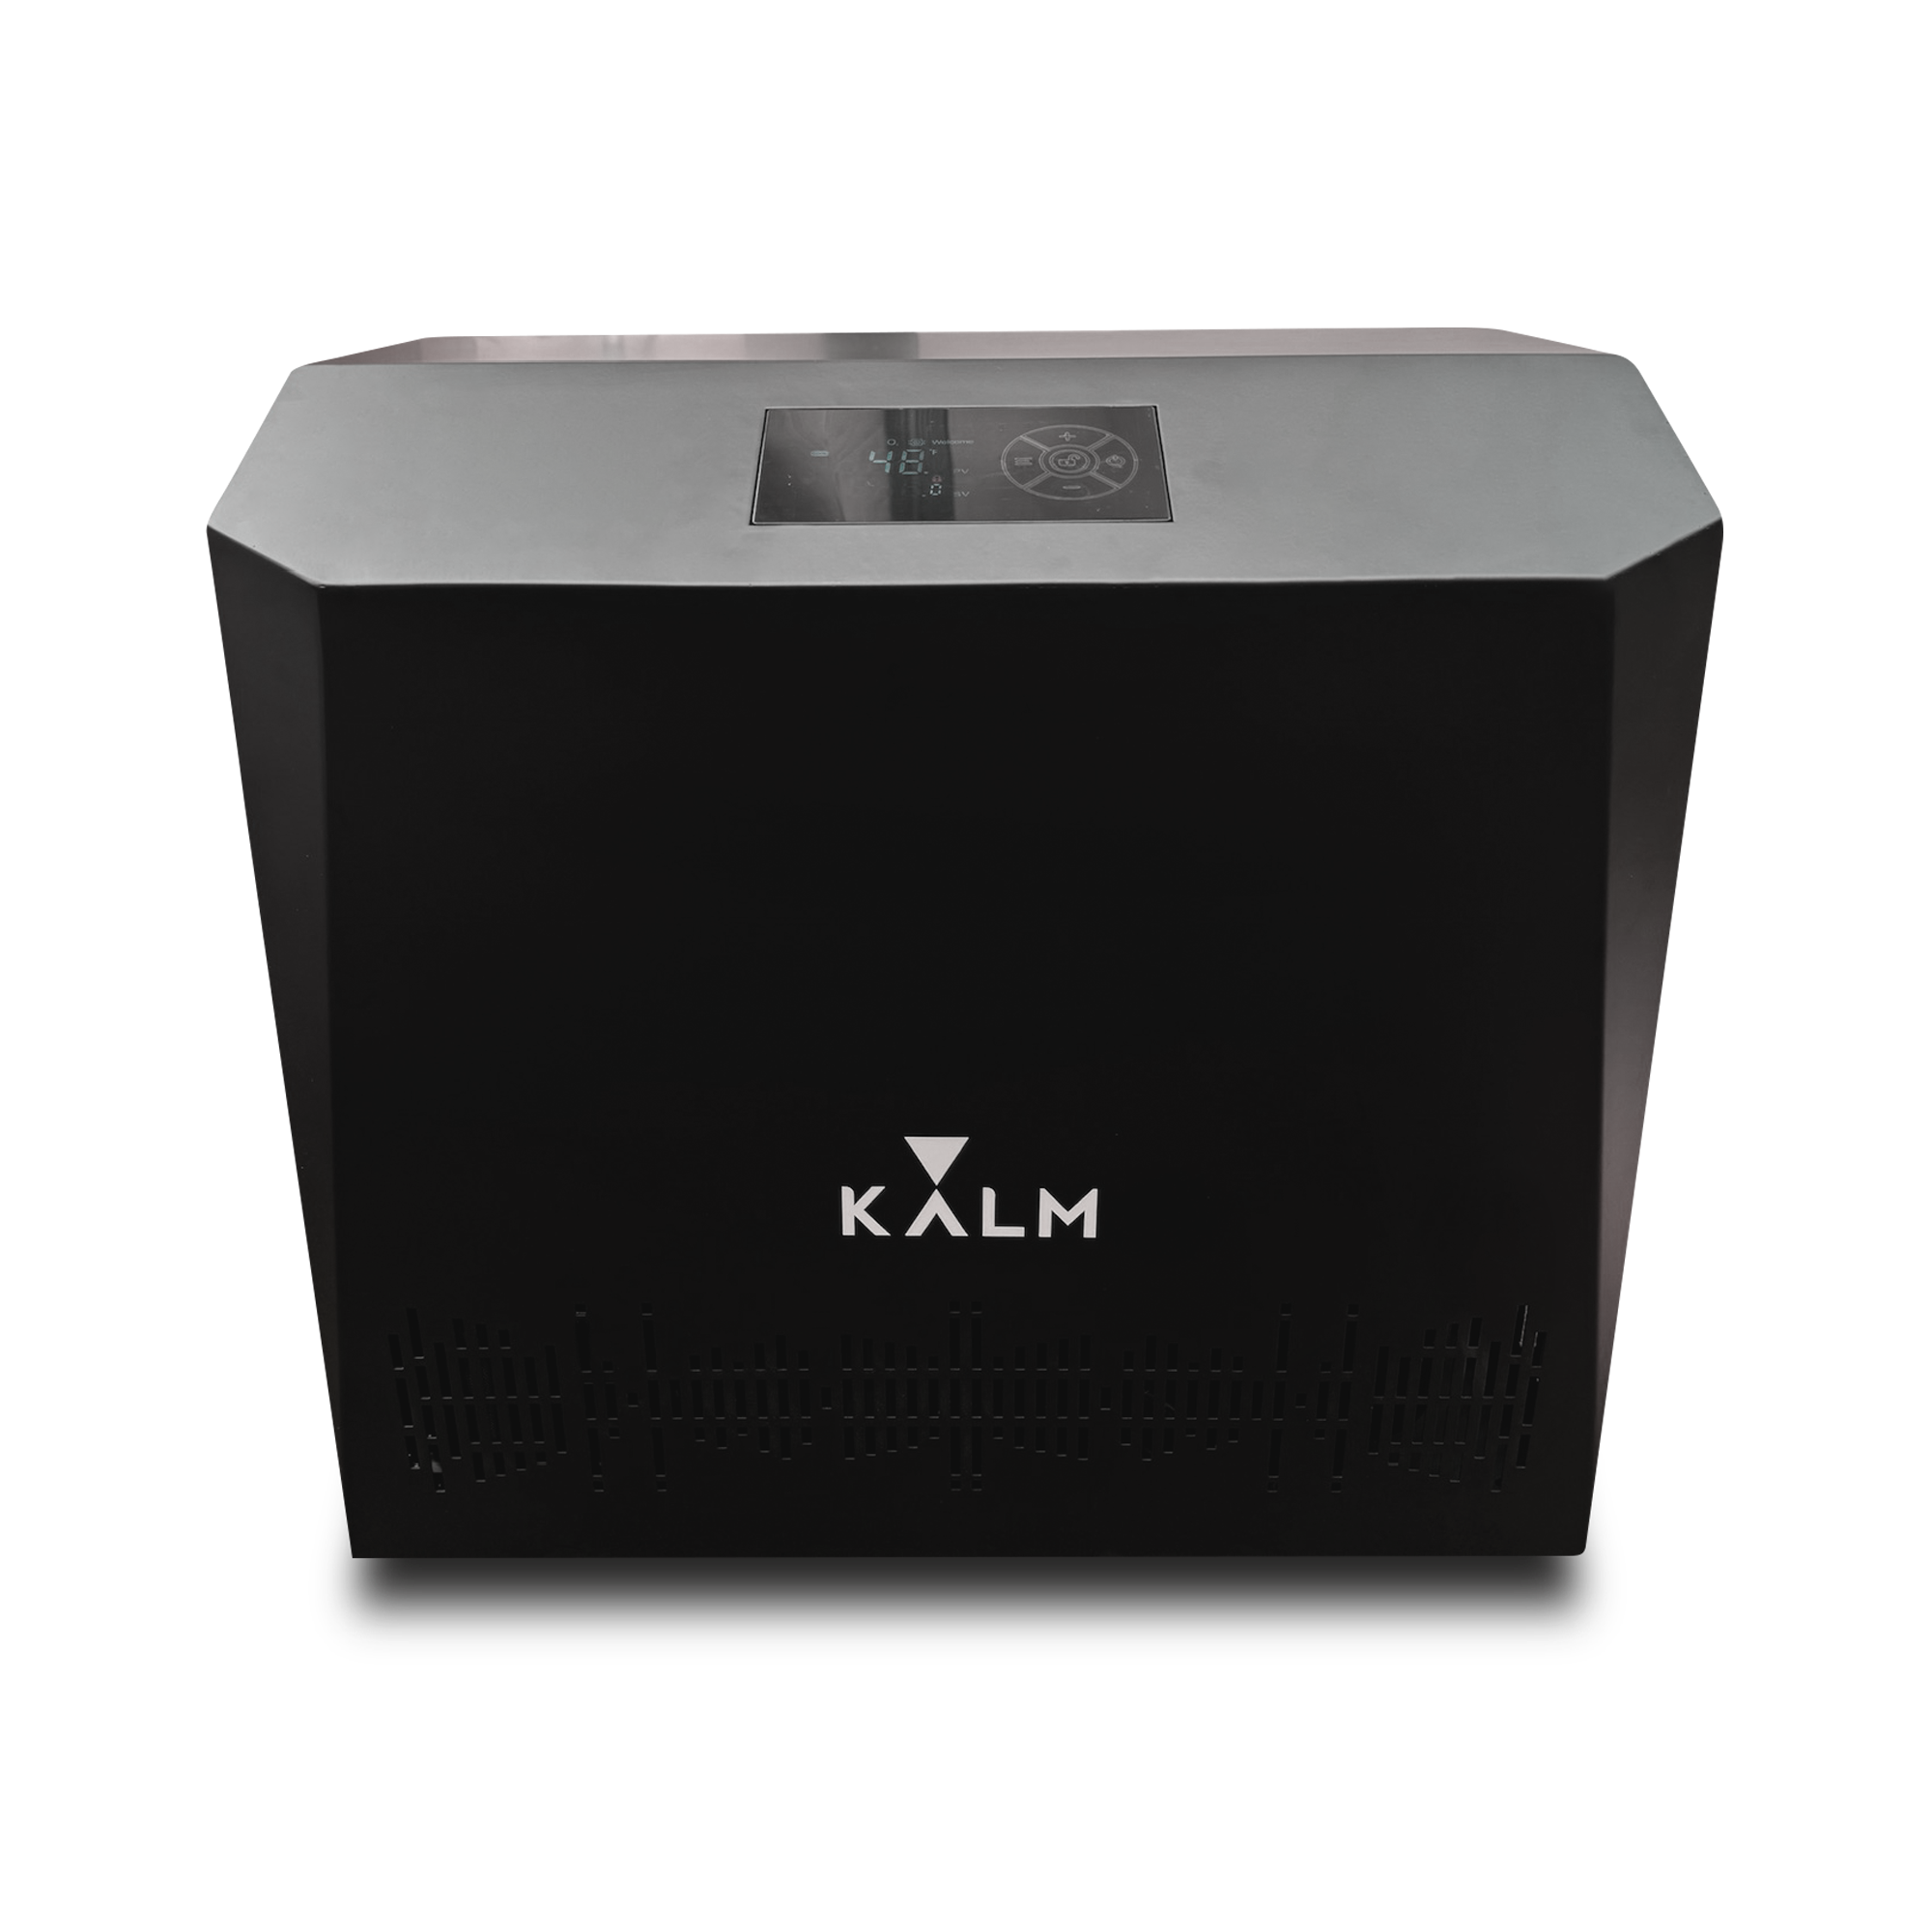 Kalm KryoSPA 1HP Water Chiller for Ice Bath with Heater -WiFi Enabled and O-Zone Ready -suitable for Cold plunge Tubs